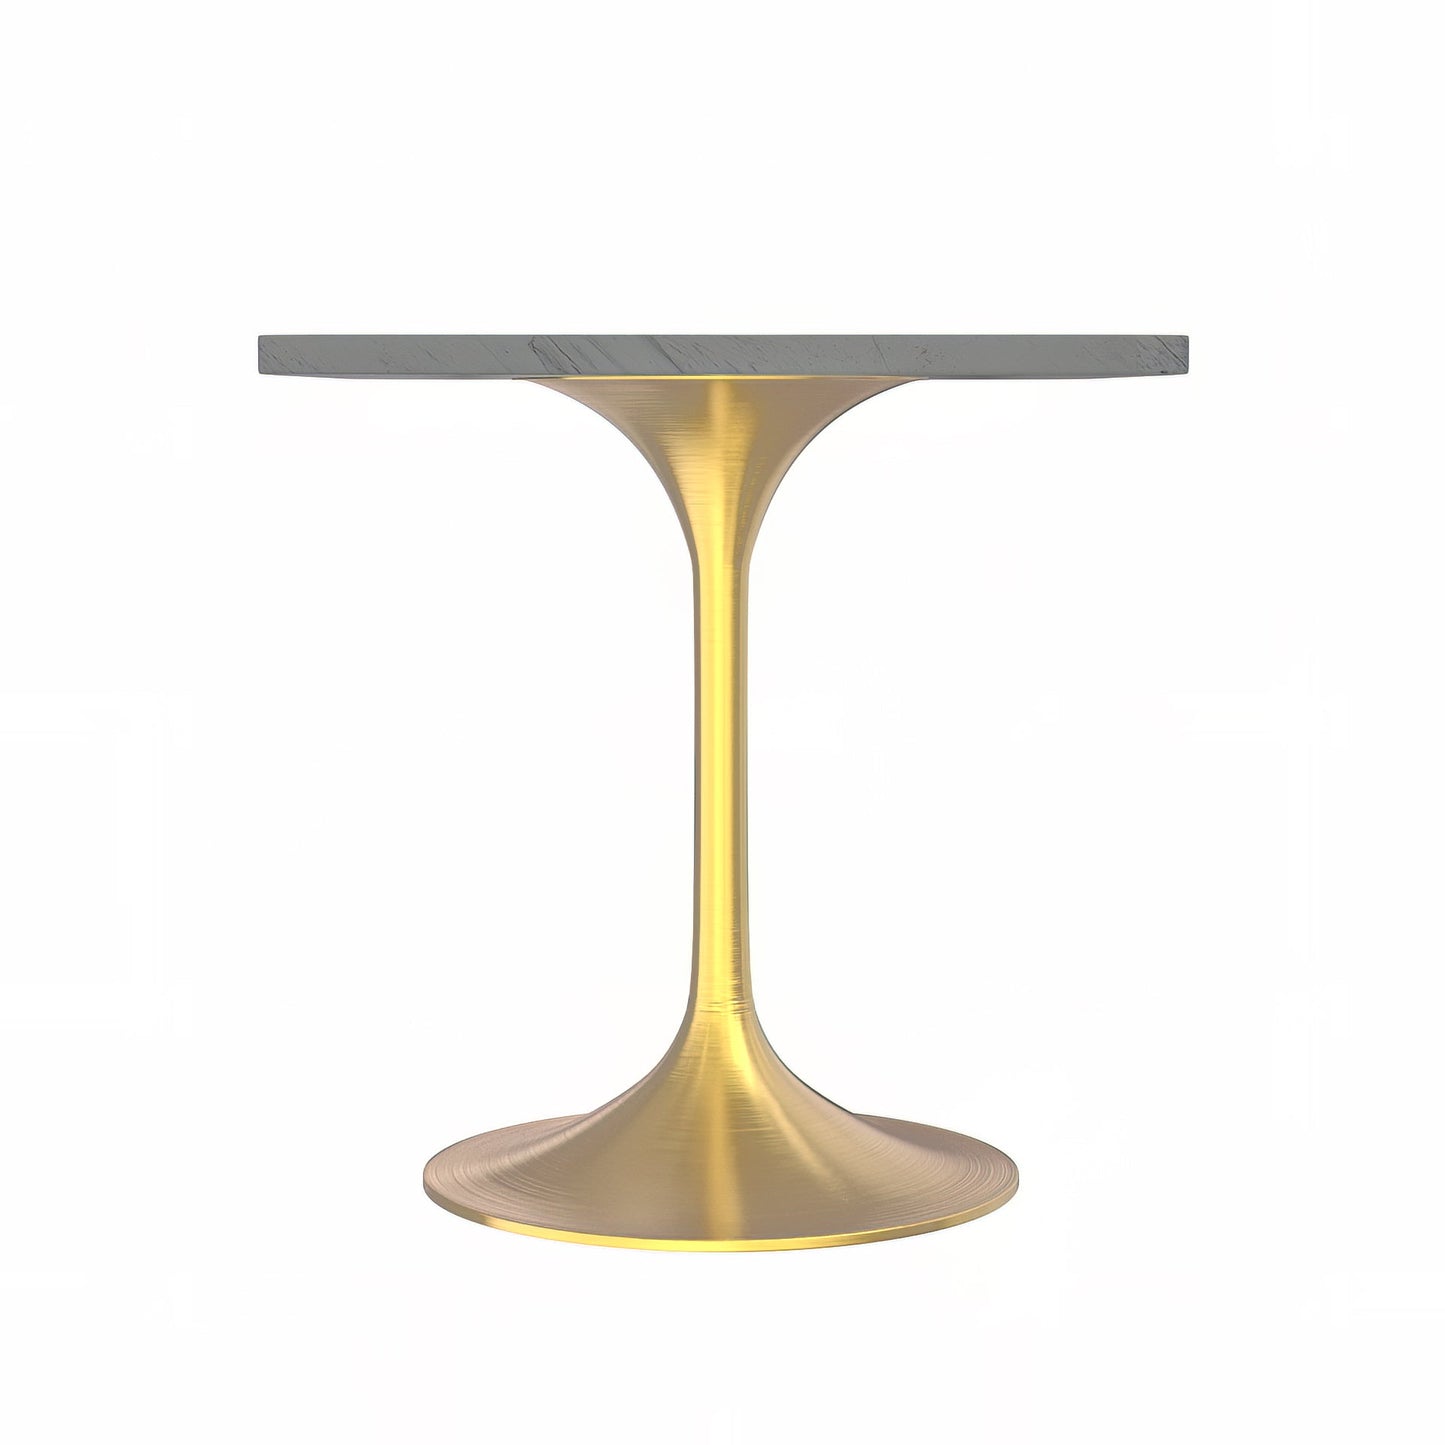 Vera 36" Square Dining Table - Gold Base Marbleized Top